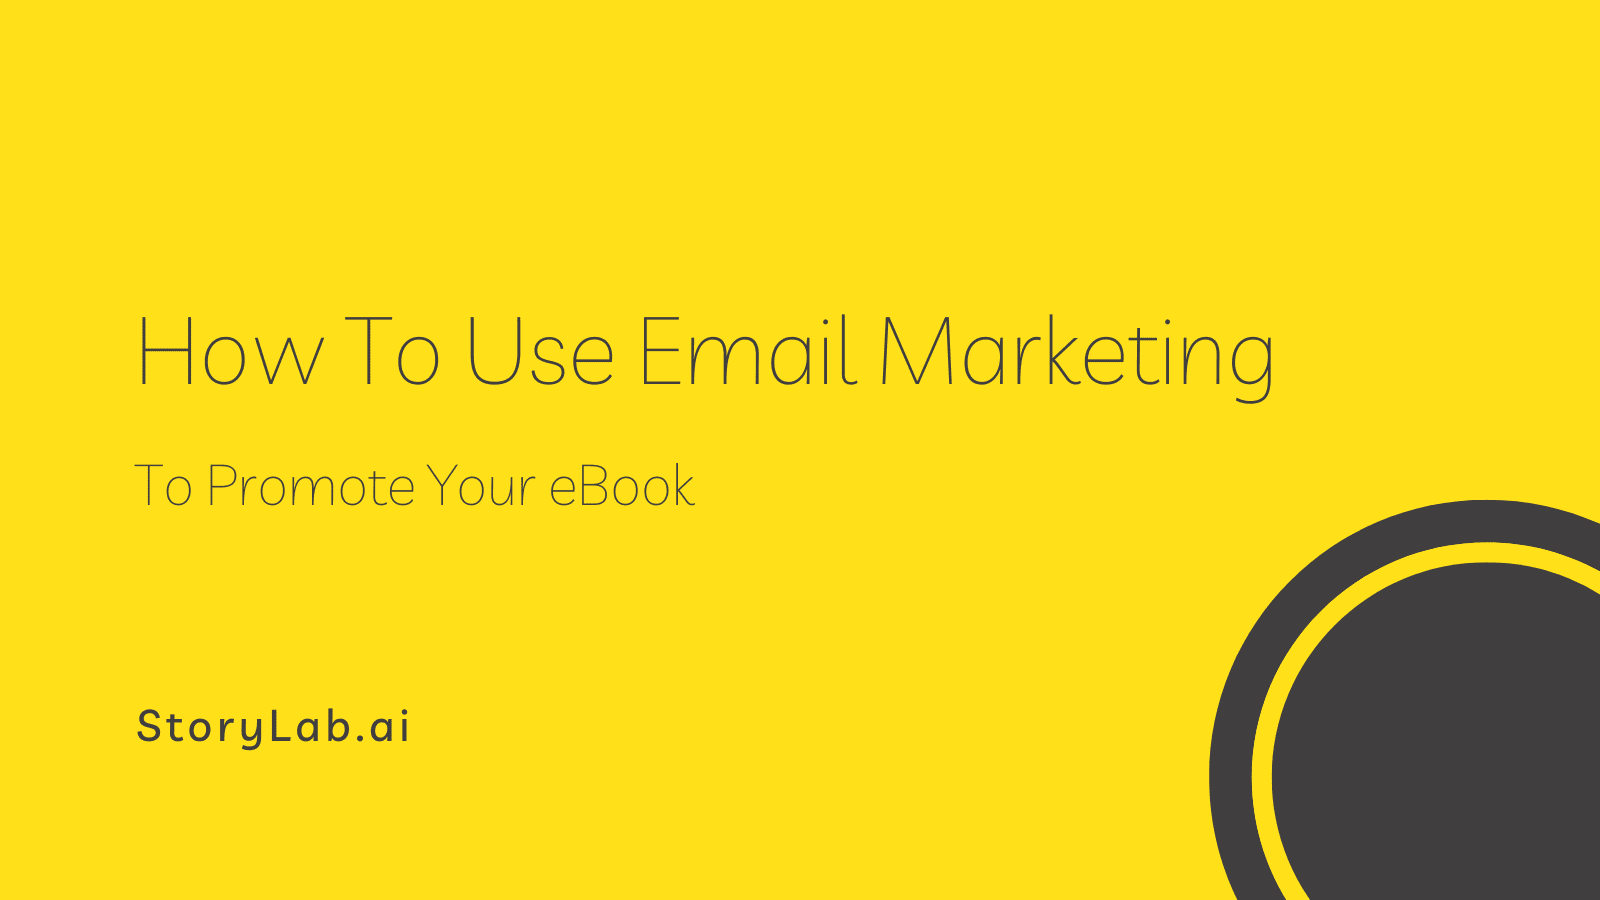 How To Use Email Marketing To Promote Your eBook